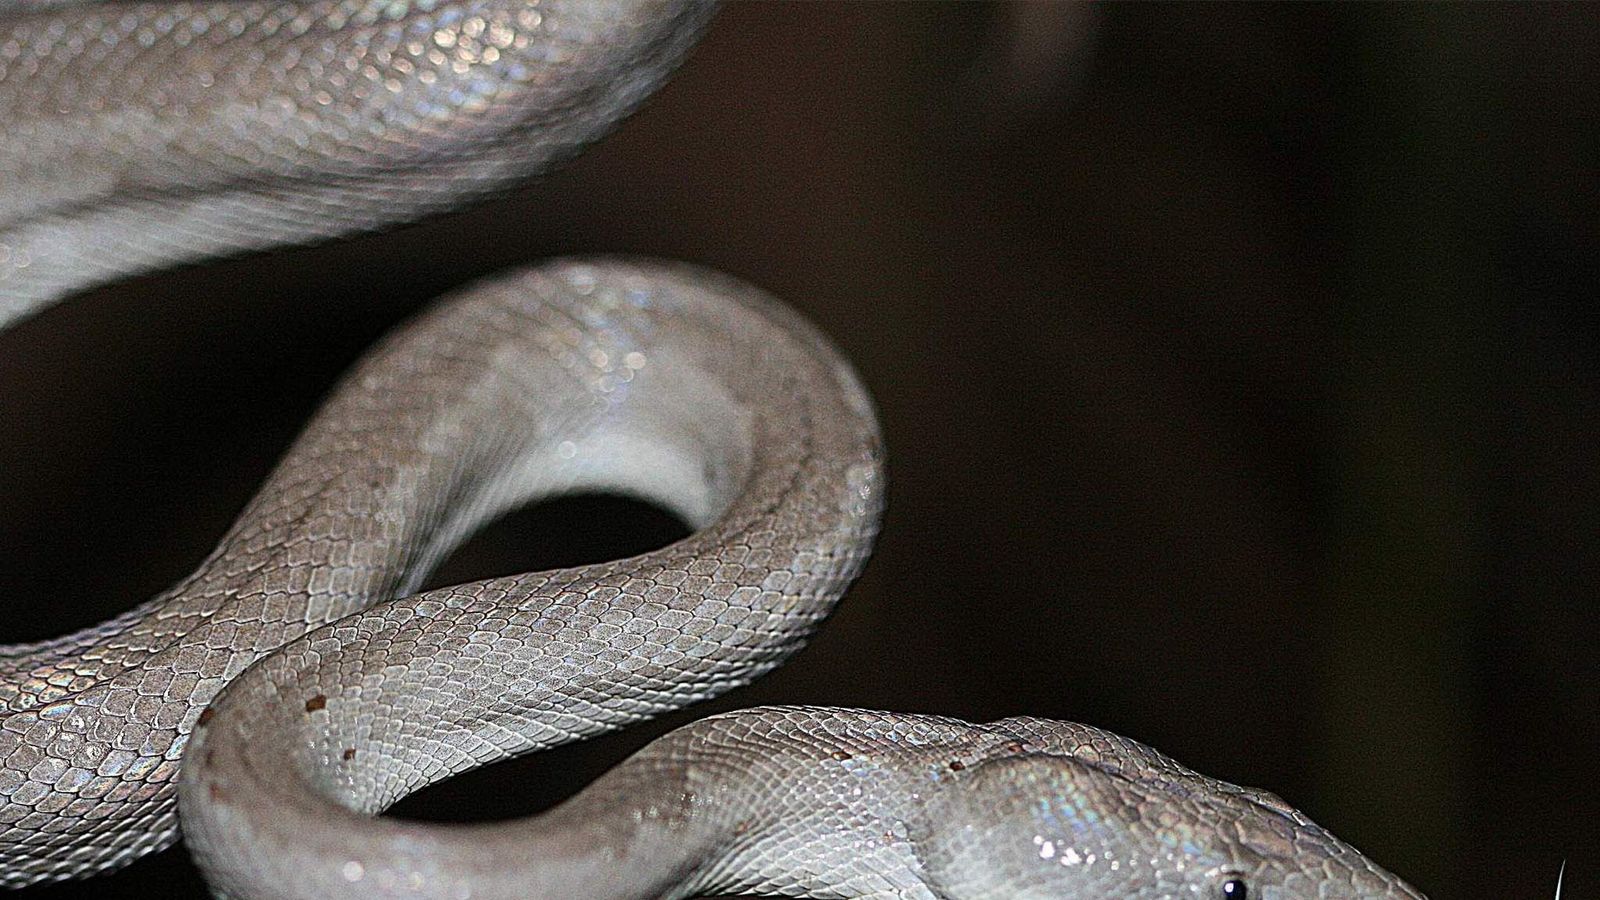 New Silver Boa Constrictor Discovered On Island, US News